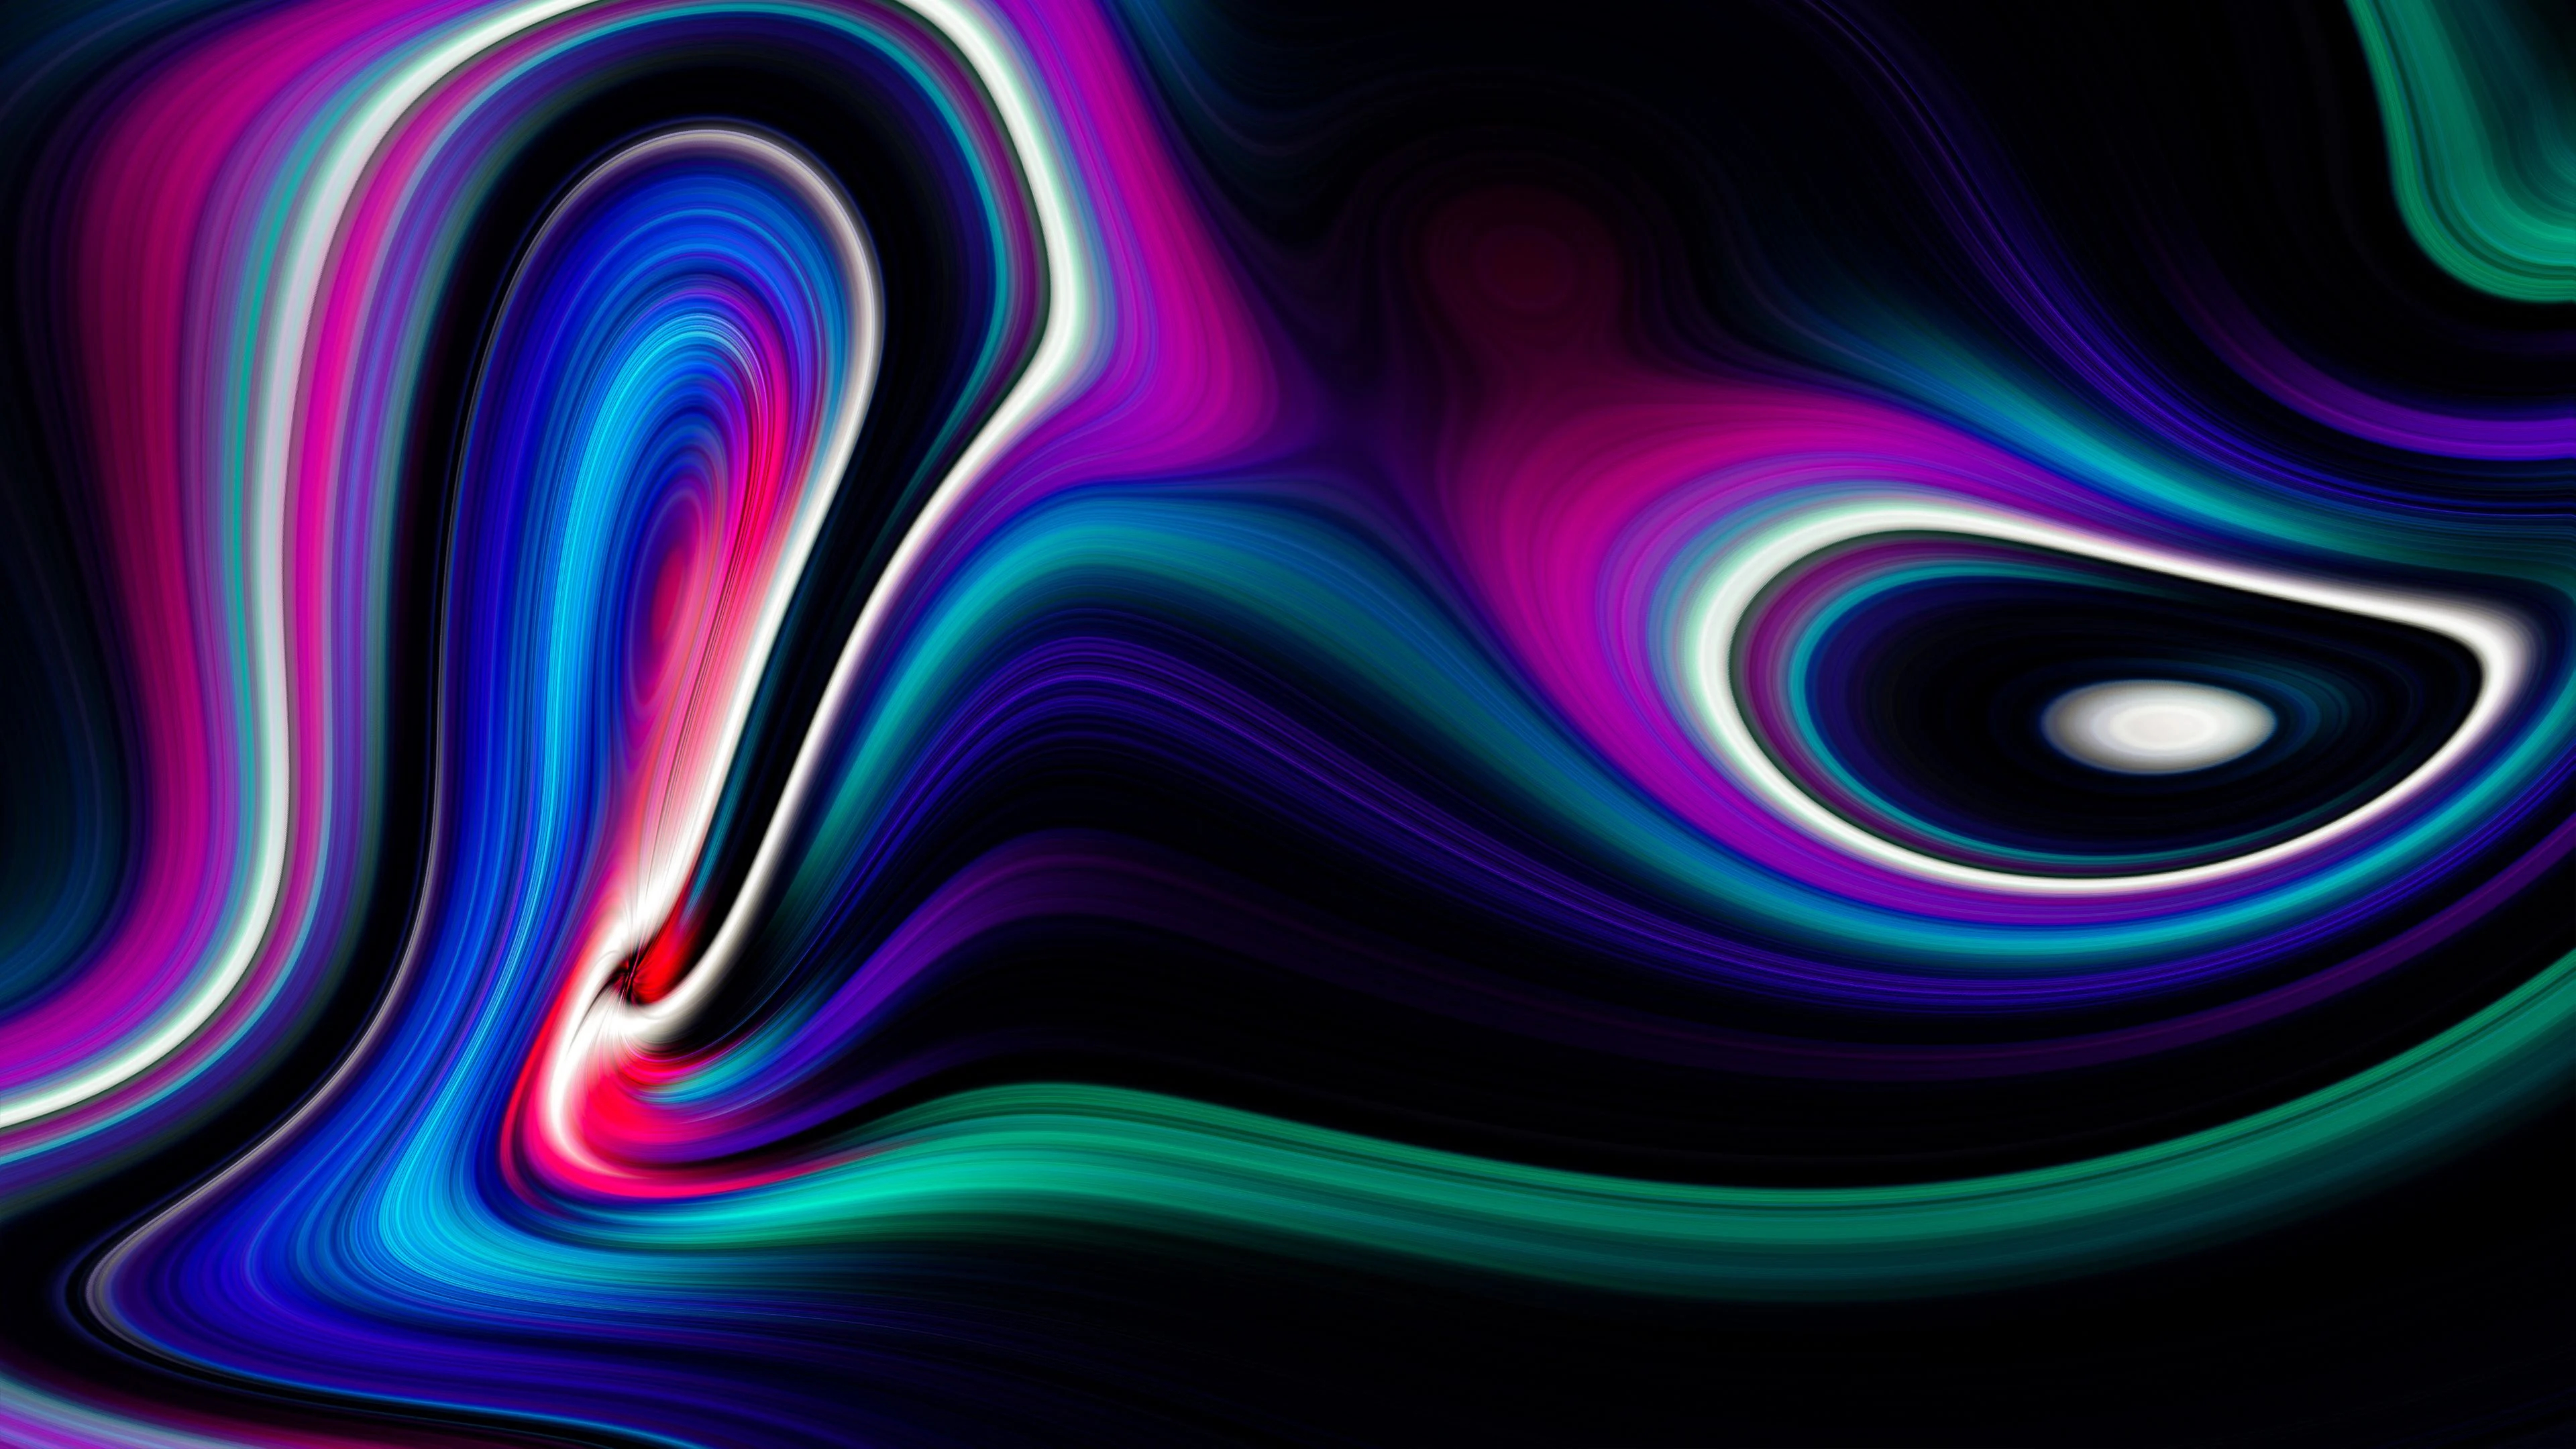 3840x2160 Abstract Swirl Wallpapers Top Free Abstract Swirl Backgrounds